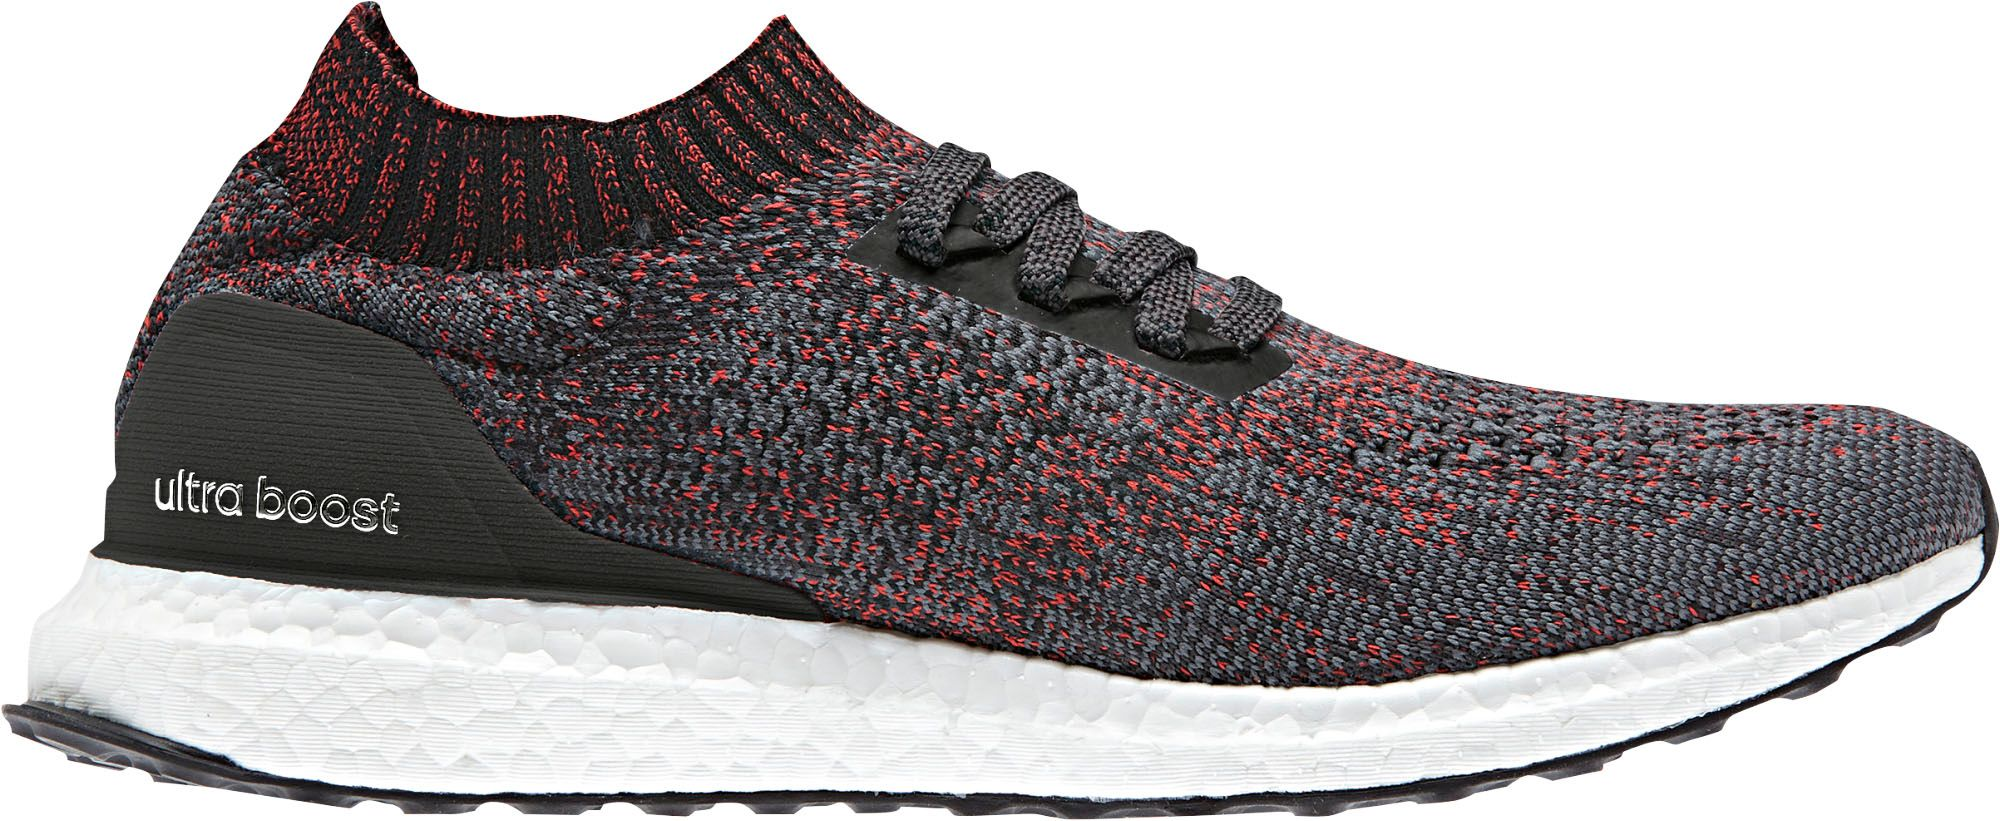 ultraboost uncaged shoes adidas